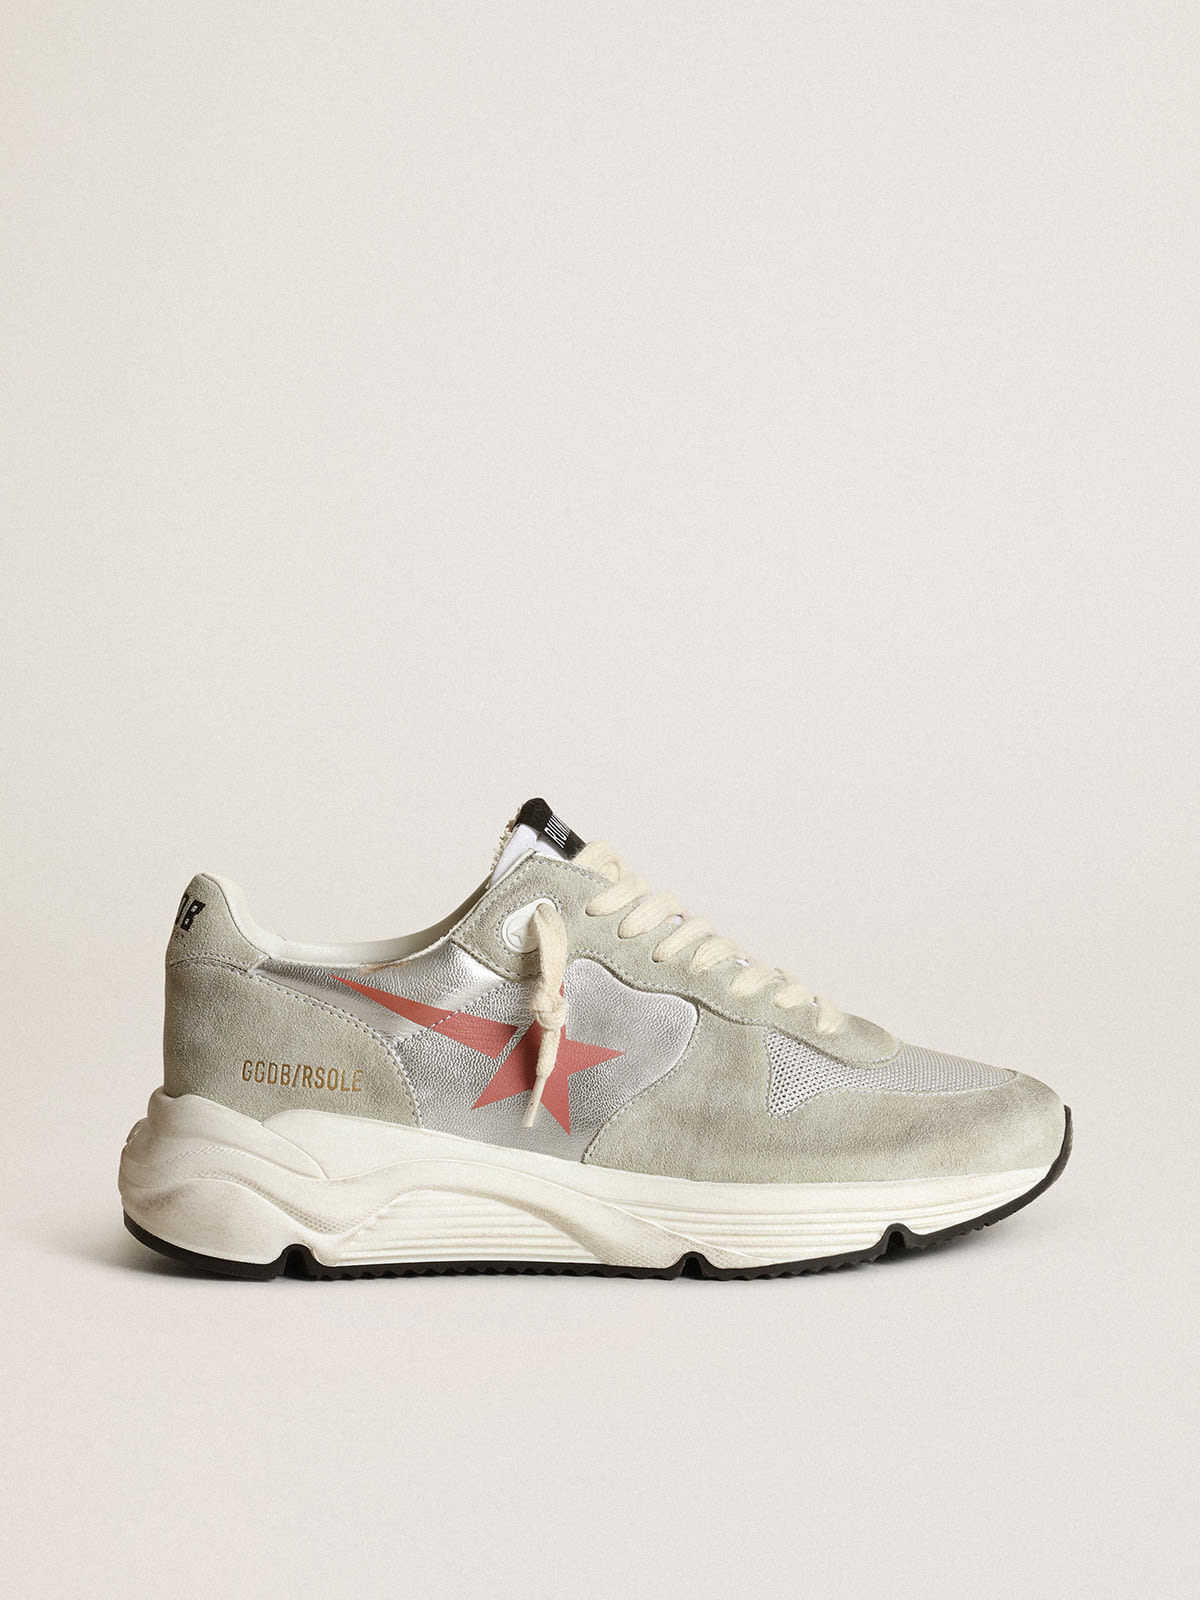 Golden Goose - Women's Running Sole in silver leather with ice-gray inserts in 